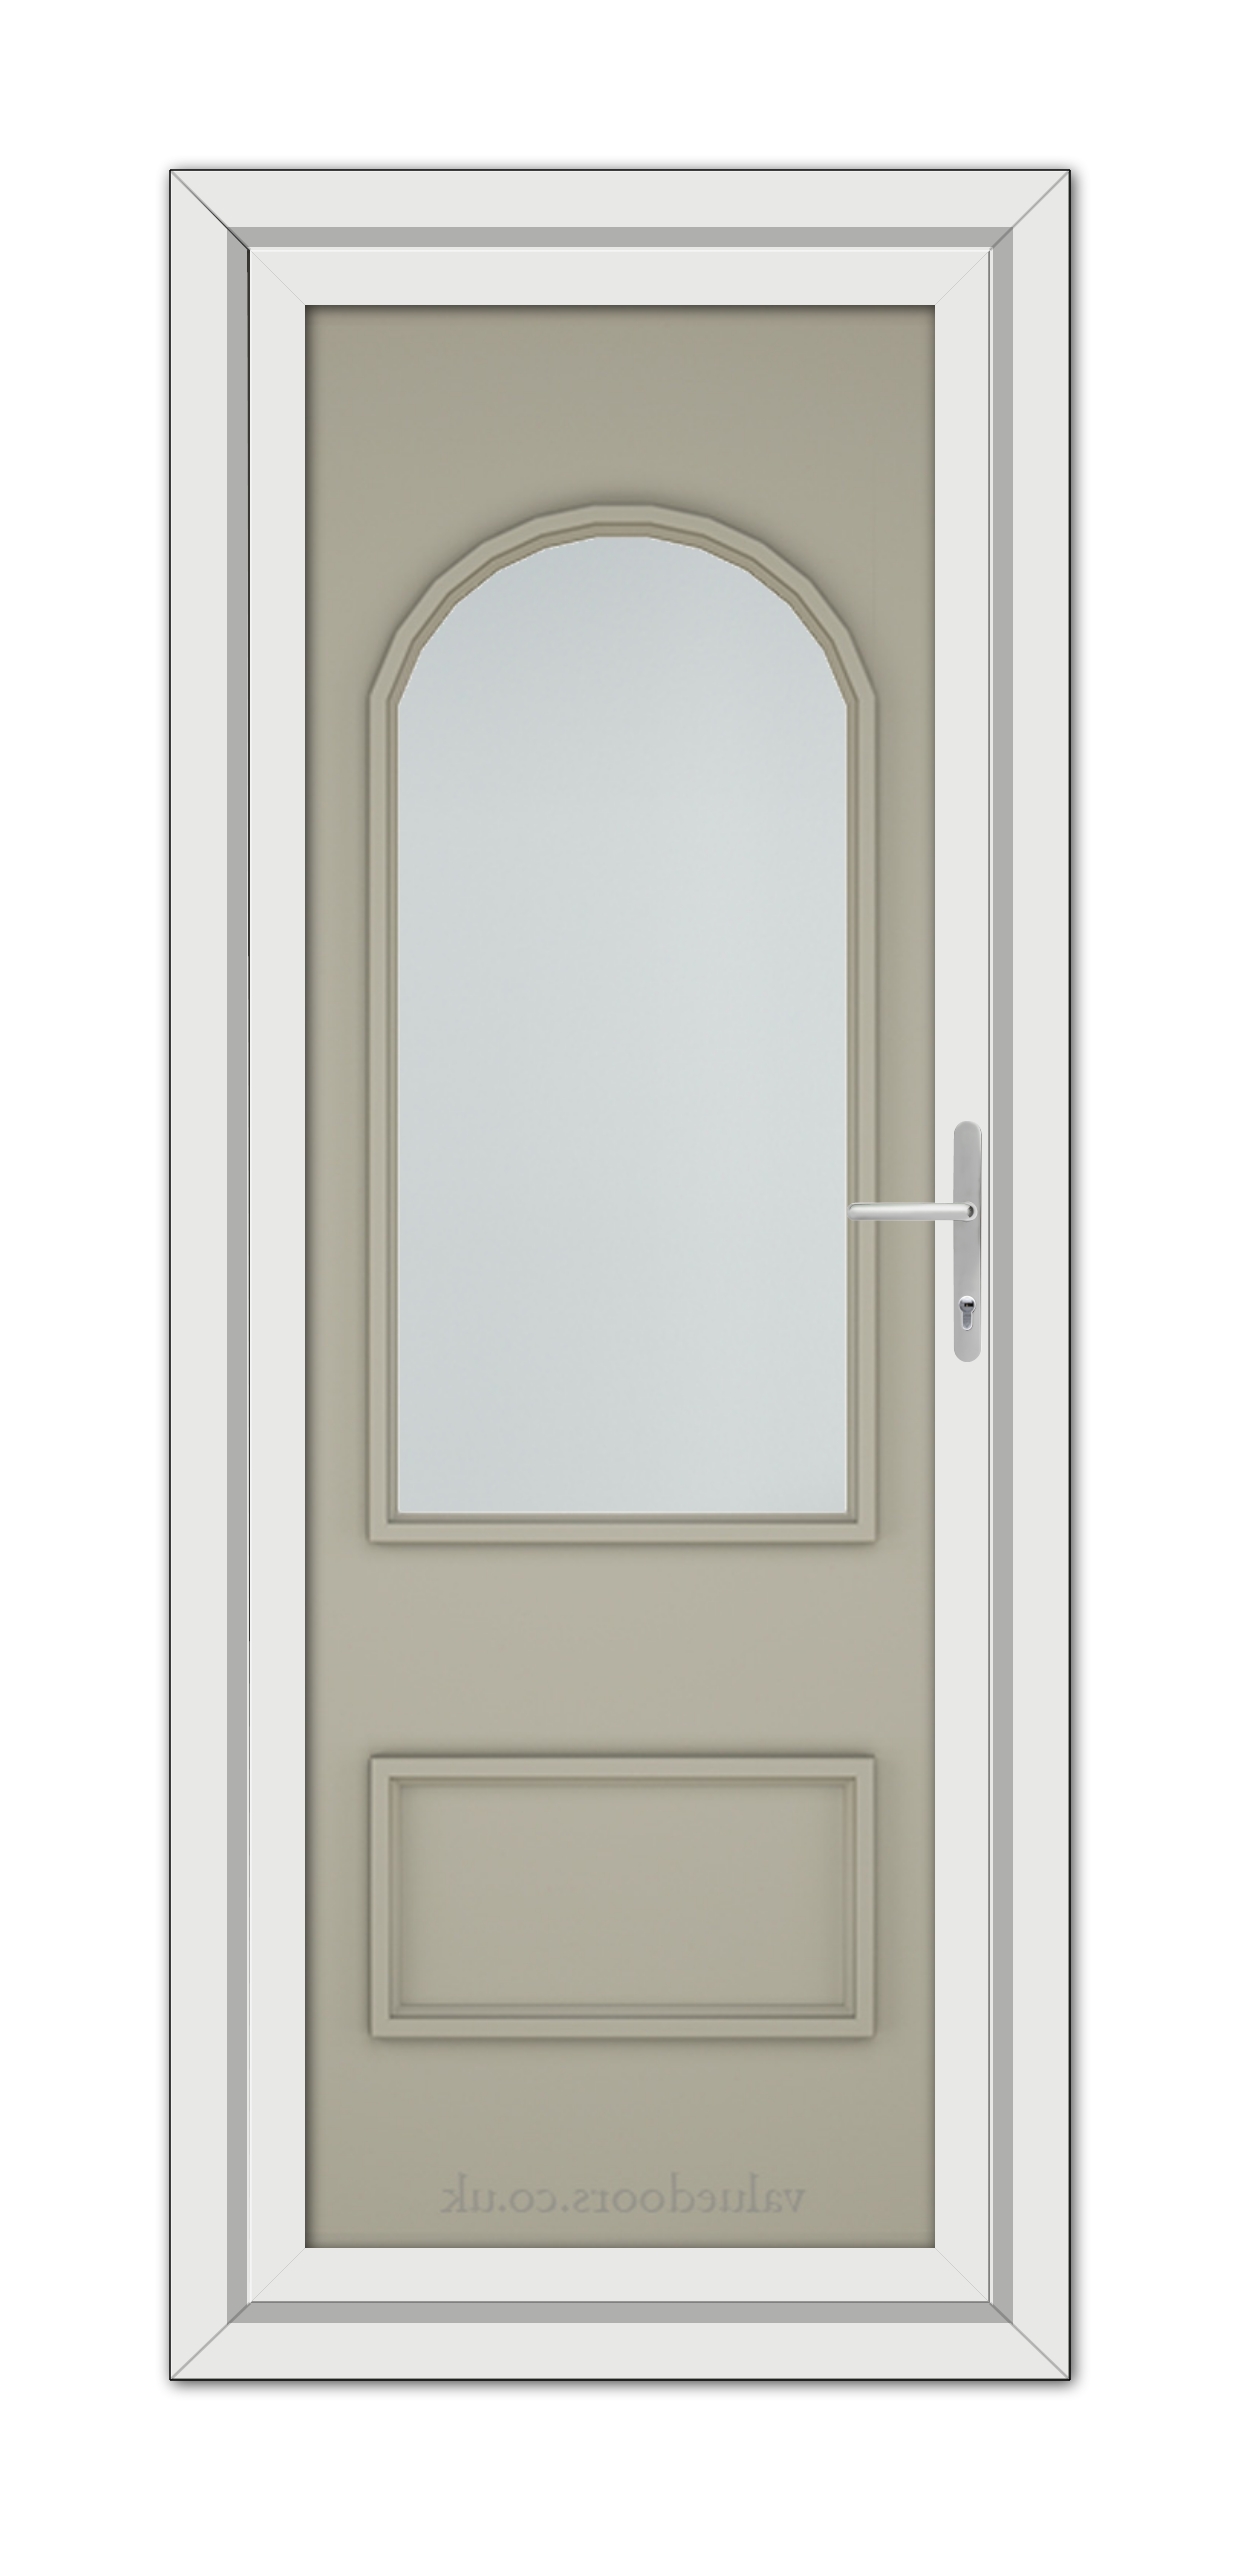 A modern Pebble Grey Rockingham uPVC door with a vertical oval glass panel and a chrome handle, set within a white frame.